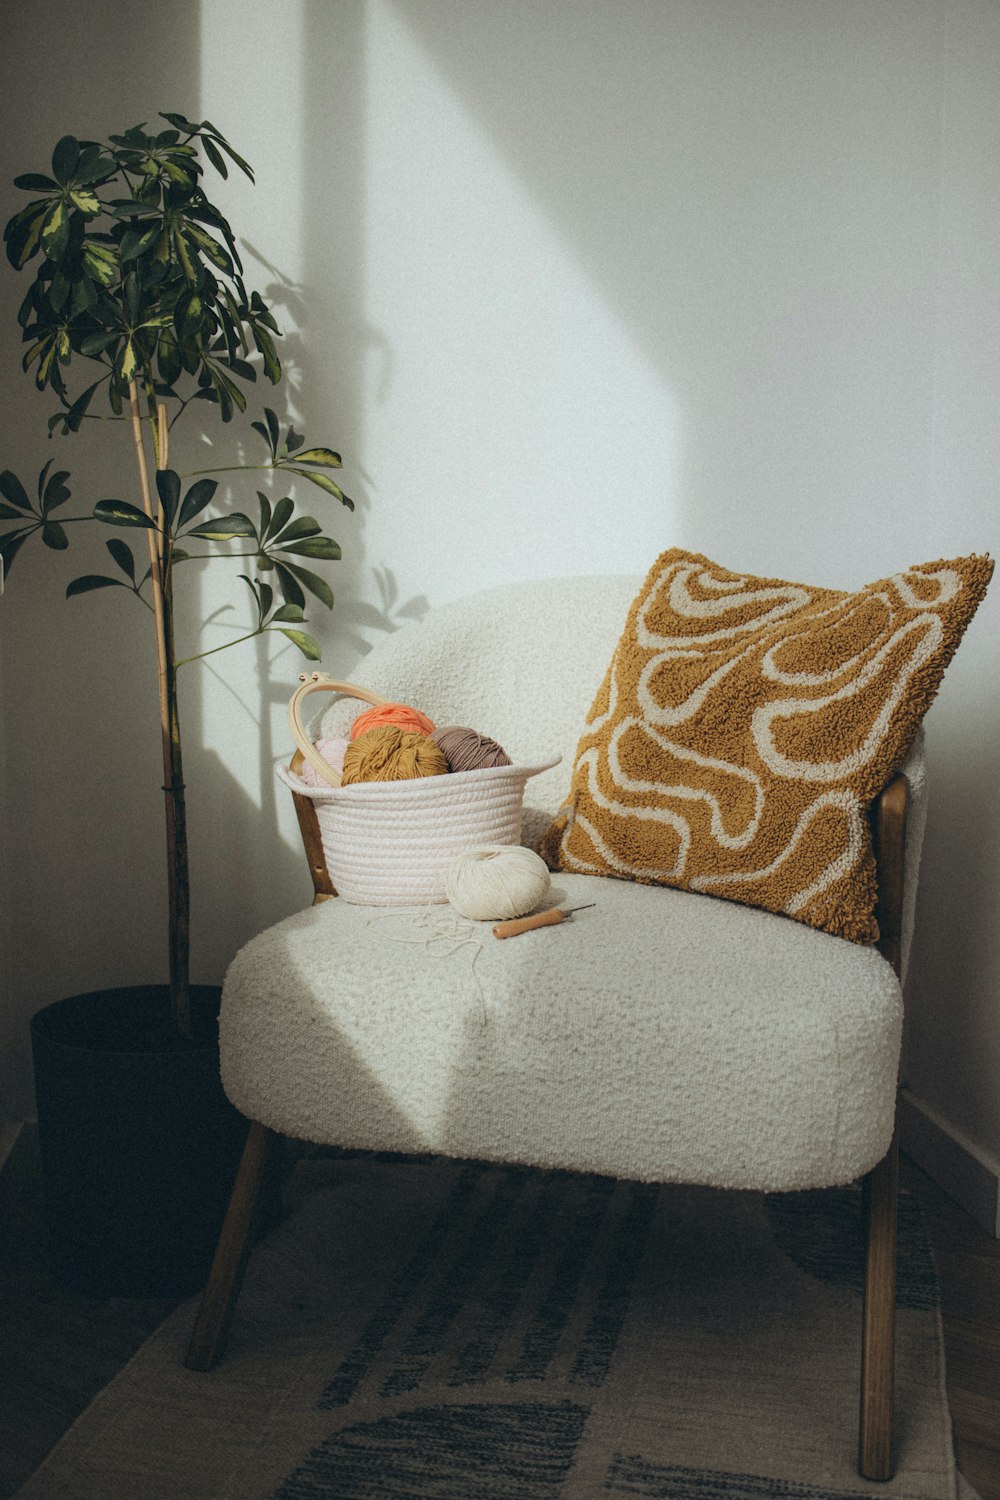 a white chair with a basket of fruit on it